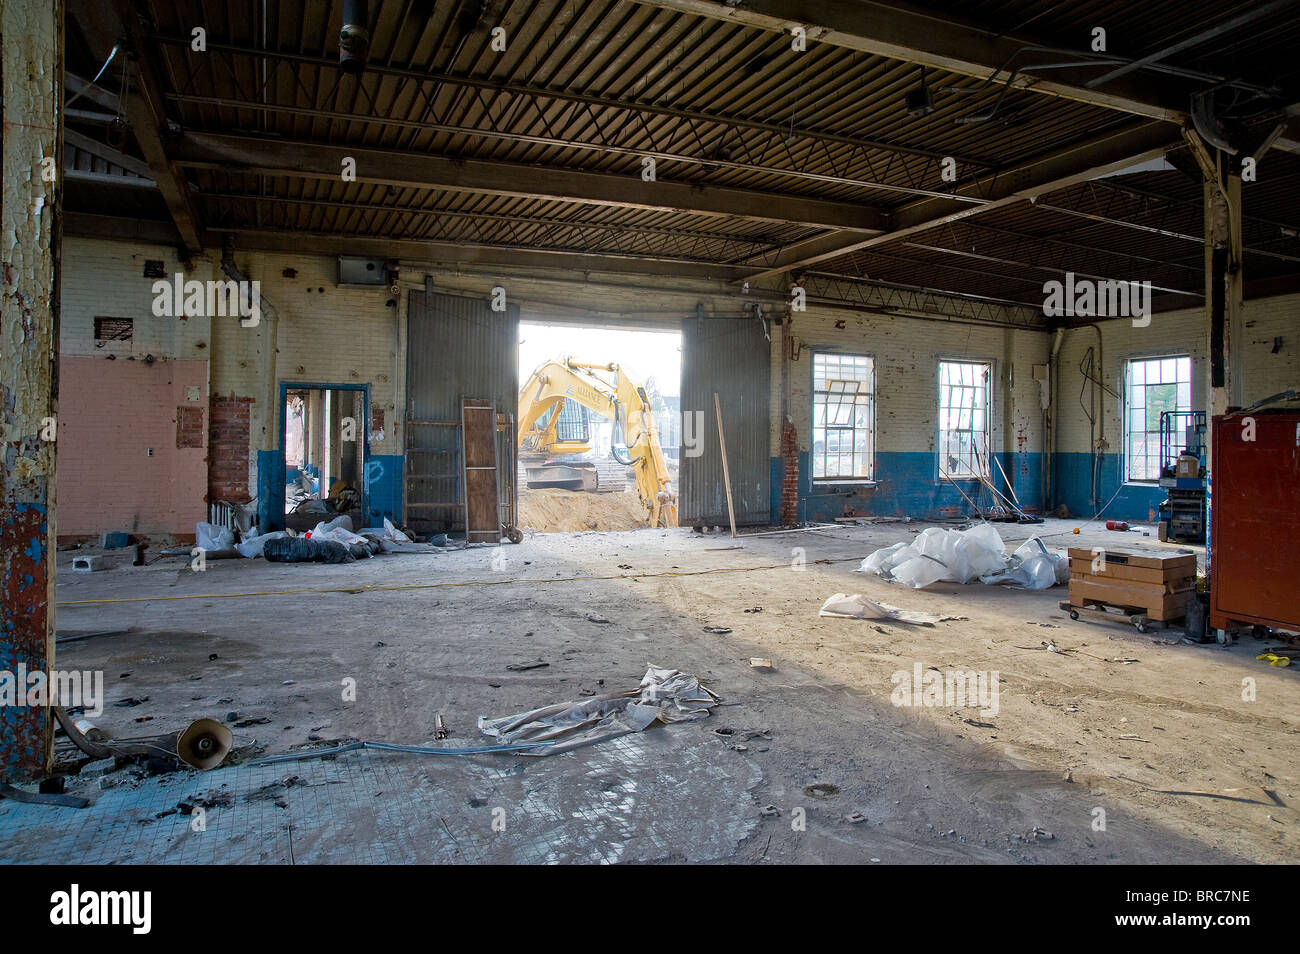 Demolition Of Old Industrial Building With Doorway Hole In Wall, Philadelphia, USA Stock Photo